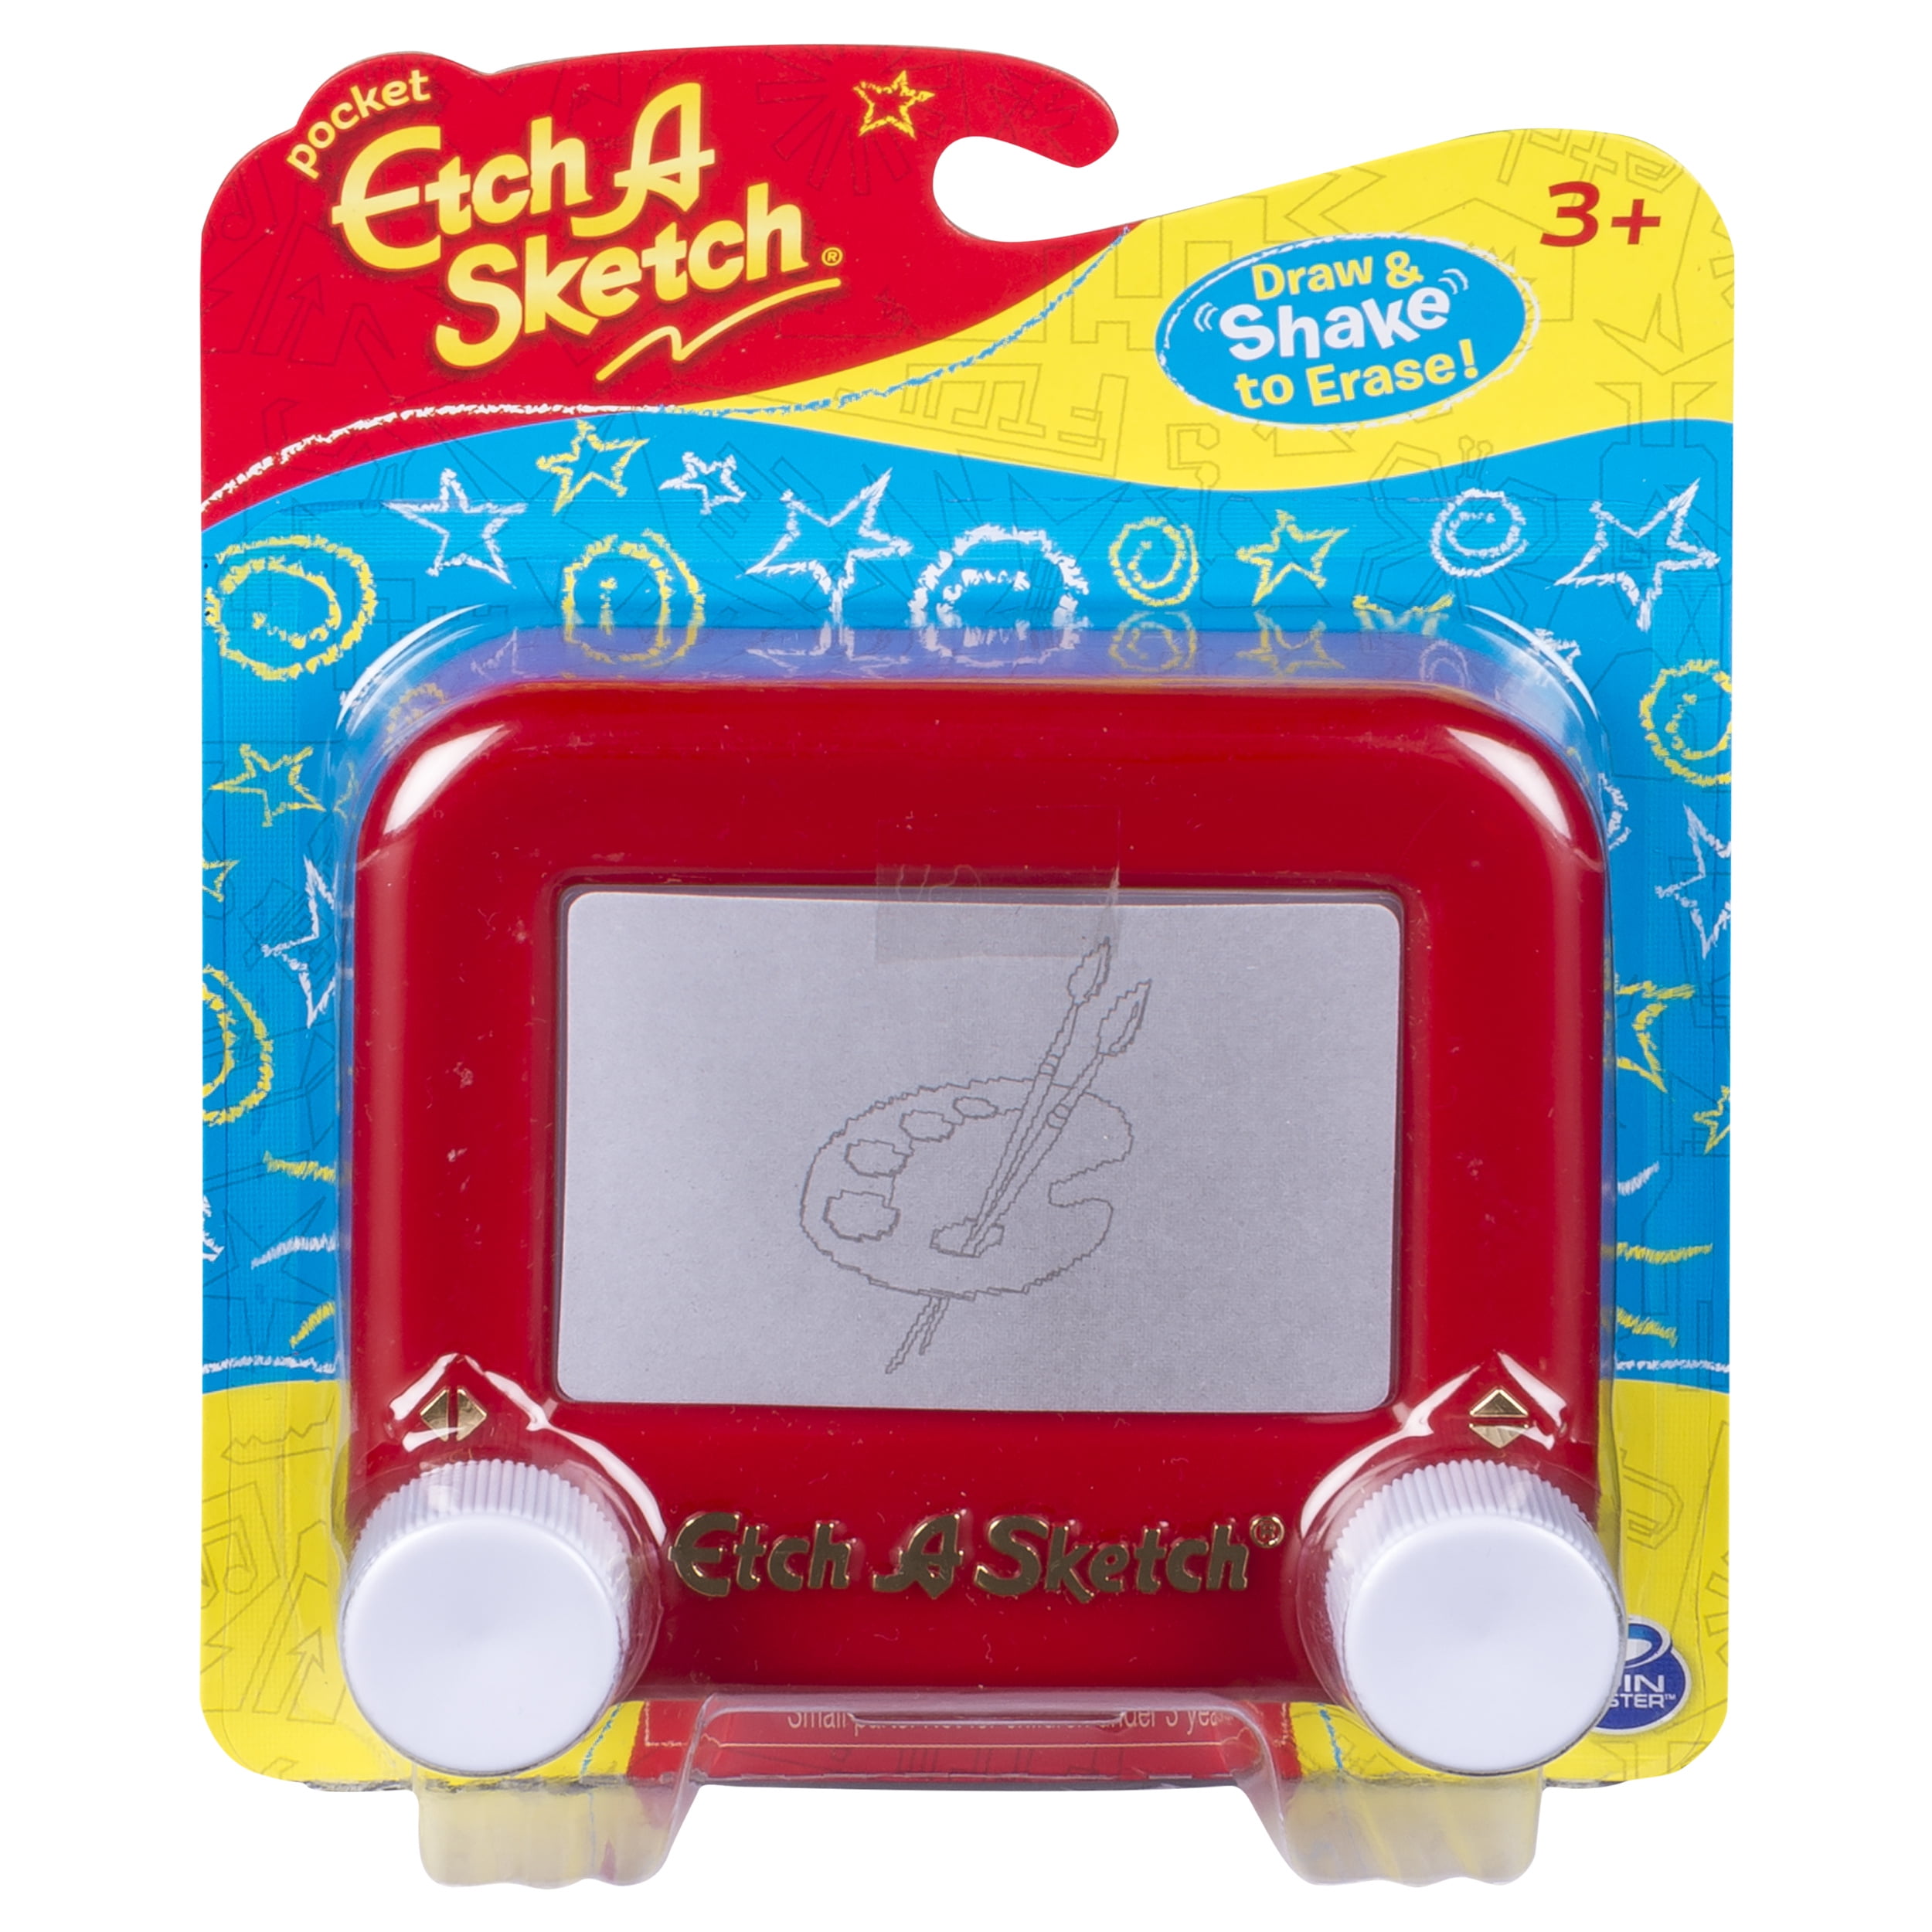 In Package Spin Master Pocket Etch-A-Sketch Miniature Size Drawing Toy 